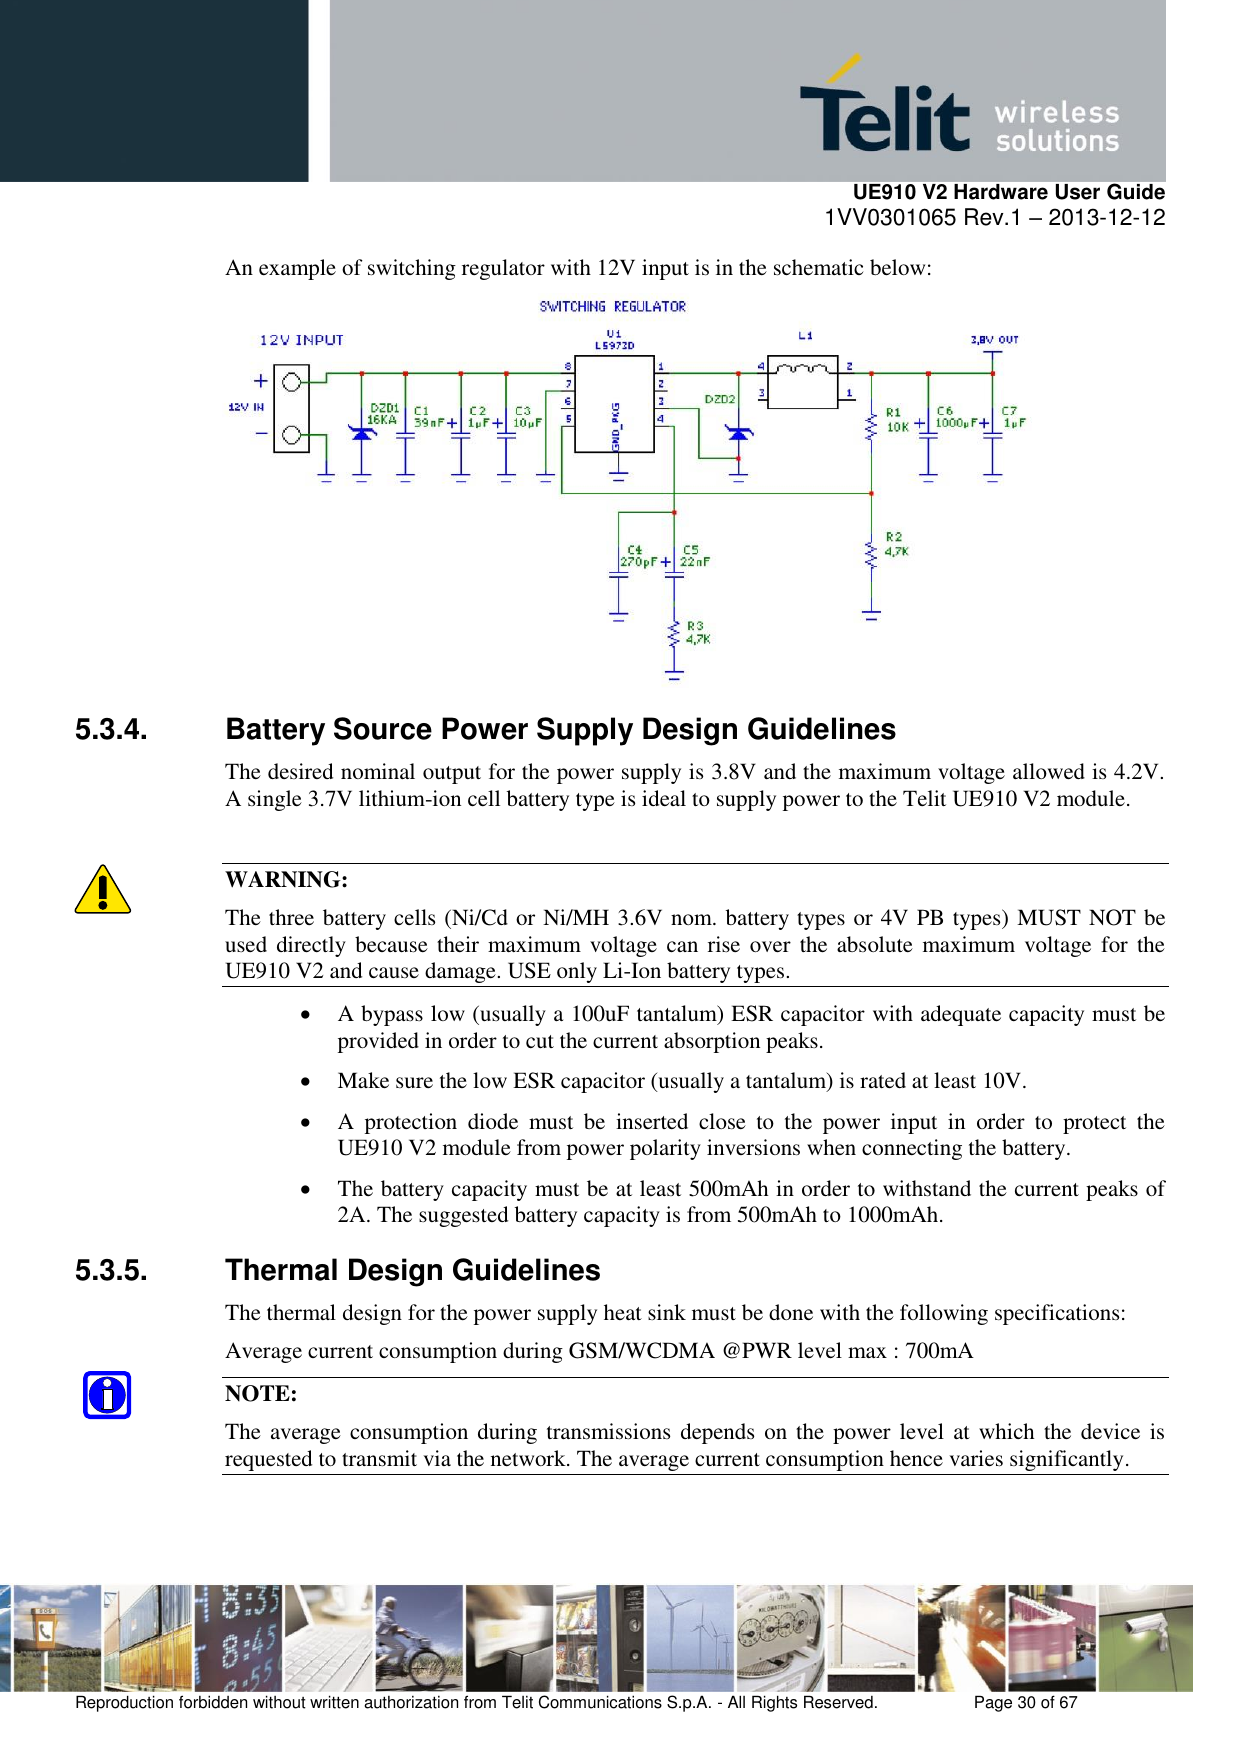     UE910 V2 Hardware User Guide 1VV0301065 Rev.1 – 2013-12-12  Reproduction forbidden without written authorization from Telit Communications S.p.A. - All Rights Reserved.    Page 30 of 67                                                     An example of switching regulator with 12V input is in the schematic below:  5.3.4.  Battery Source Power Supply Design Guidelines The desired nominal output for the power supply is 3.8V and the maximum voltage allowed is 4.2V. A single 3.7V lithium-ion cell battery type is ideal to supply power to the Telit UE910 V2 module.  WARNING: The three battery cells (Ni/Cd or Ni/MH 3.6V nom. battery types or 4V PB types) MUST NOT be used  directly because their maximum  voltage  can  rise over the absolute  maximum  voltage for  the UE910 V2 and cause damage. USE only Li-Ion battery types.  A bypass low (usually a 100uF tantalum) ESR capacitor with adequate capacity must be provided in order to cut the current absorption peaks.   Make sure the low ESR capacitor (usually a tantalum) is rated at least 10V.   A  protection  diode  must  be  inserted  close  to  the  power  input  in  order  to  protect  the UE910 V2 module from power polarity inversions when connecting the battery.  The battery capacity must be at least 500mAh in order to withstand the current peaks of 2A. The suggested battery capacity is from 500mAh to 1000mAh. 5.3.5.  Thermal Design Guidelines The thermal design for the power supply heat sink must be done with the following specifications: Average current consumption during GSM/WCDMA @PWR level max : 700mA NOTE: The average consumption during  transmissions depends on the power level at which  the device is requested to transmit via the network. The average current consumption hence varies significantly. 